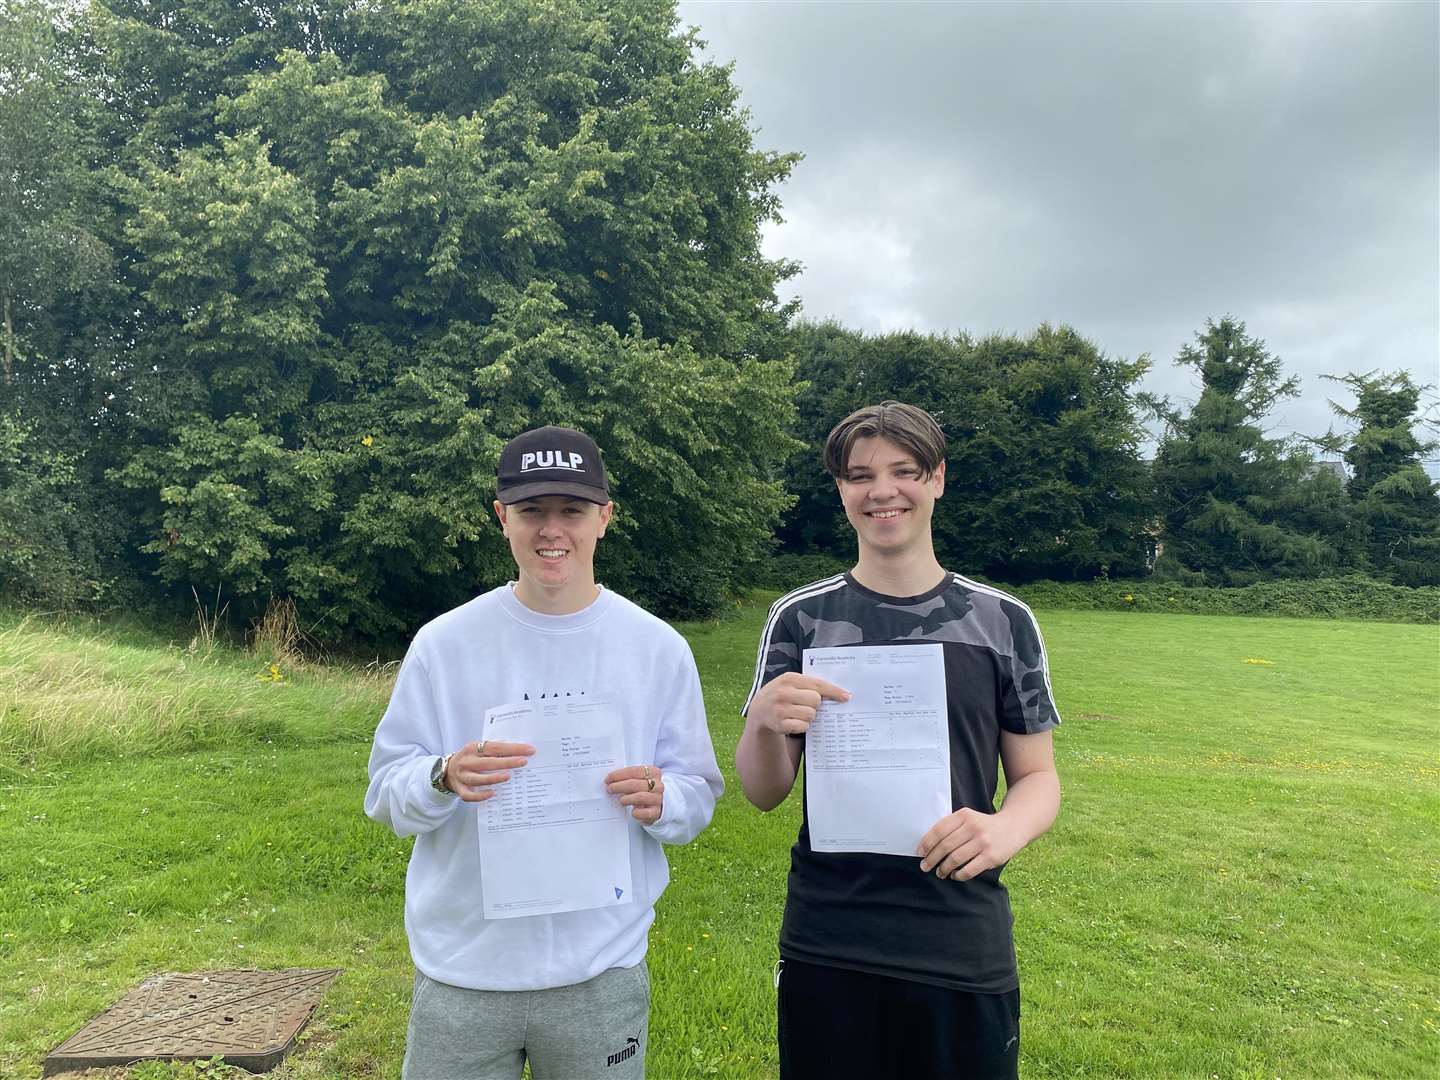 Sam Fridd achieved one Distinction*, two 8s , one Distinction, two 7s, one 6, one 5 and one 4. Ben Ebbatson achieved one Distinction*, two 8s, one Distinction, three 7s, one 6 and one 5.